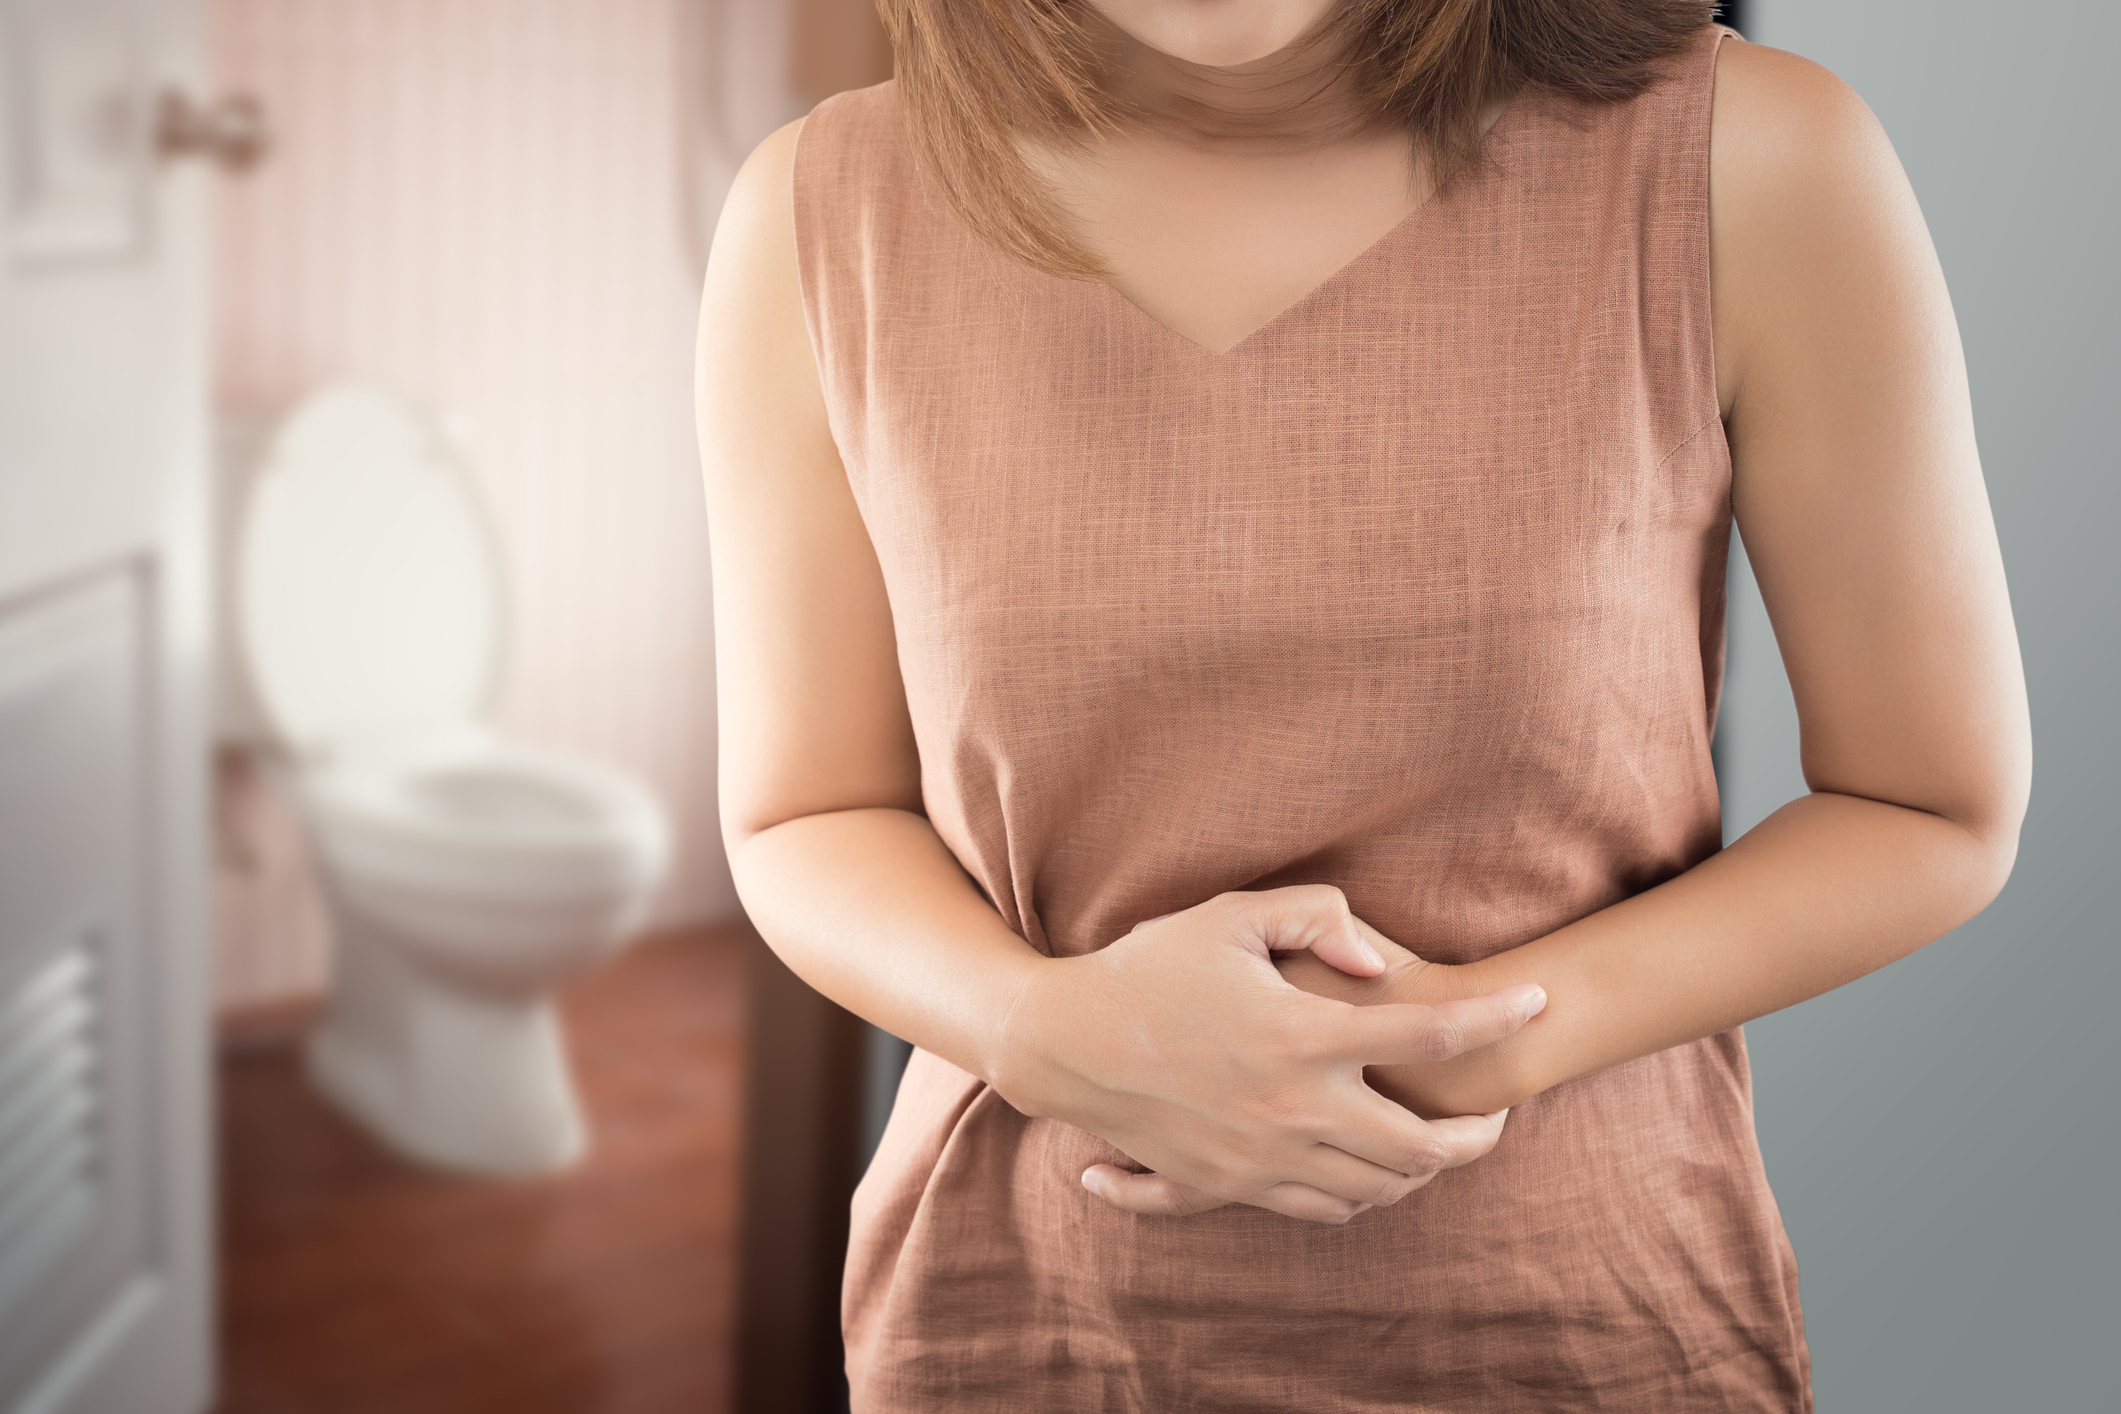 Changes to Your Poop During Pregnancy - Whats Normal?